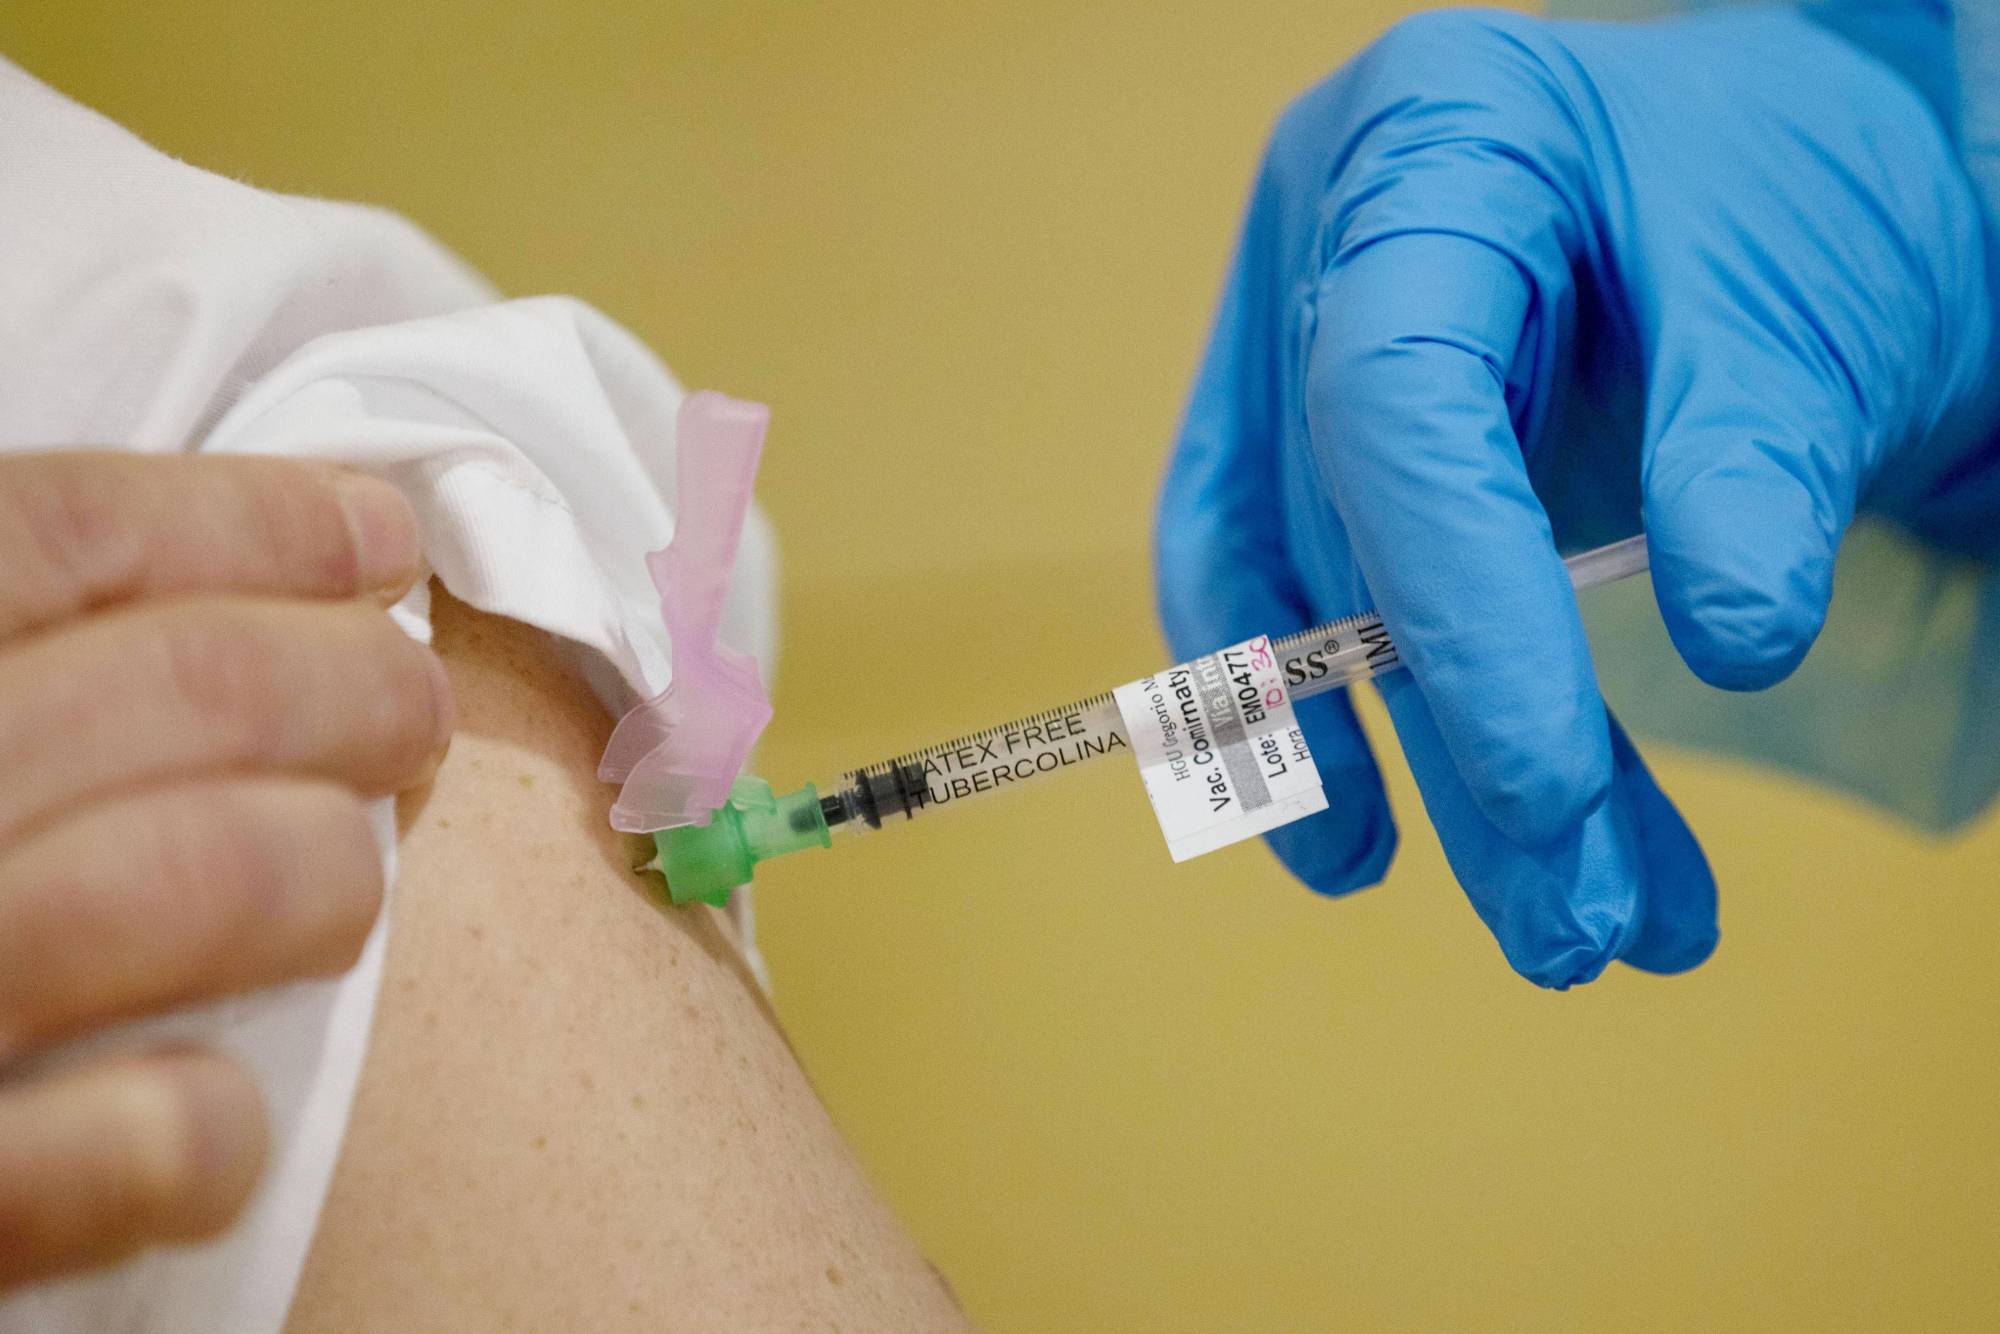 A person receives a shot of a coronavirus vaccine developed by U.S. pharmaceutical company Pfizer Inc. on Thursday in Madrid. | GETTY IMAGES / VIA KYODO